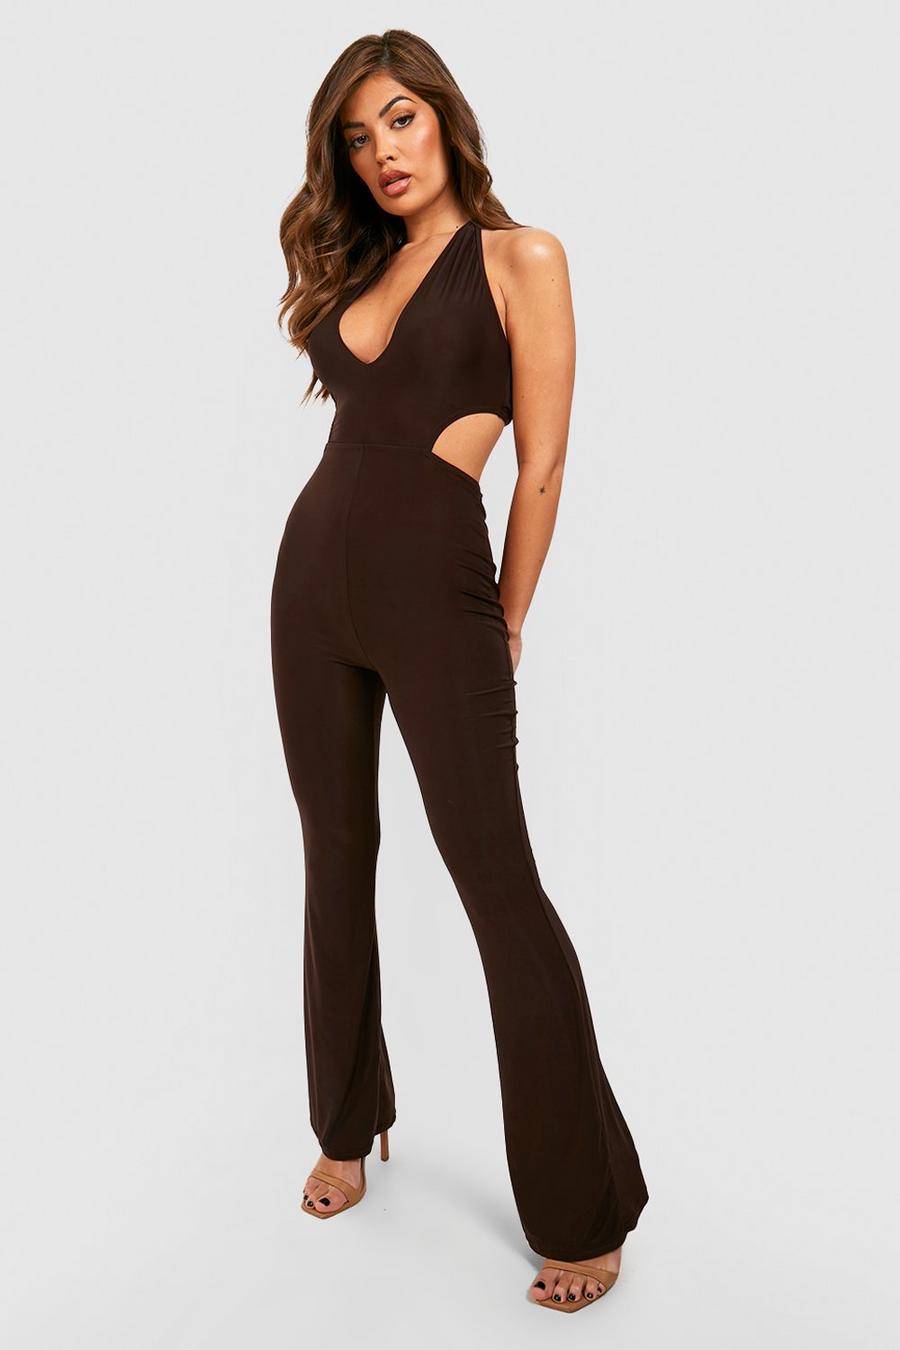 Chocolate brown Plunge Open Back Slinky Jumpsuit